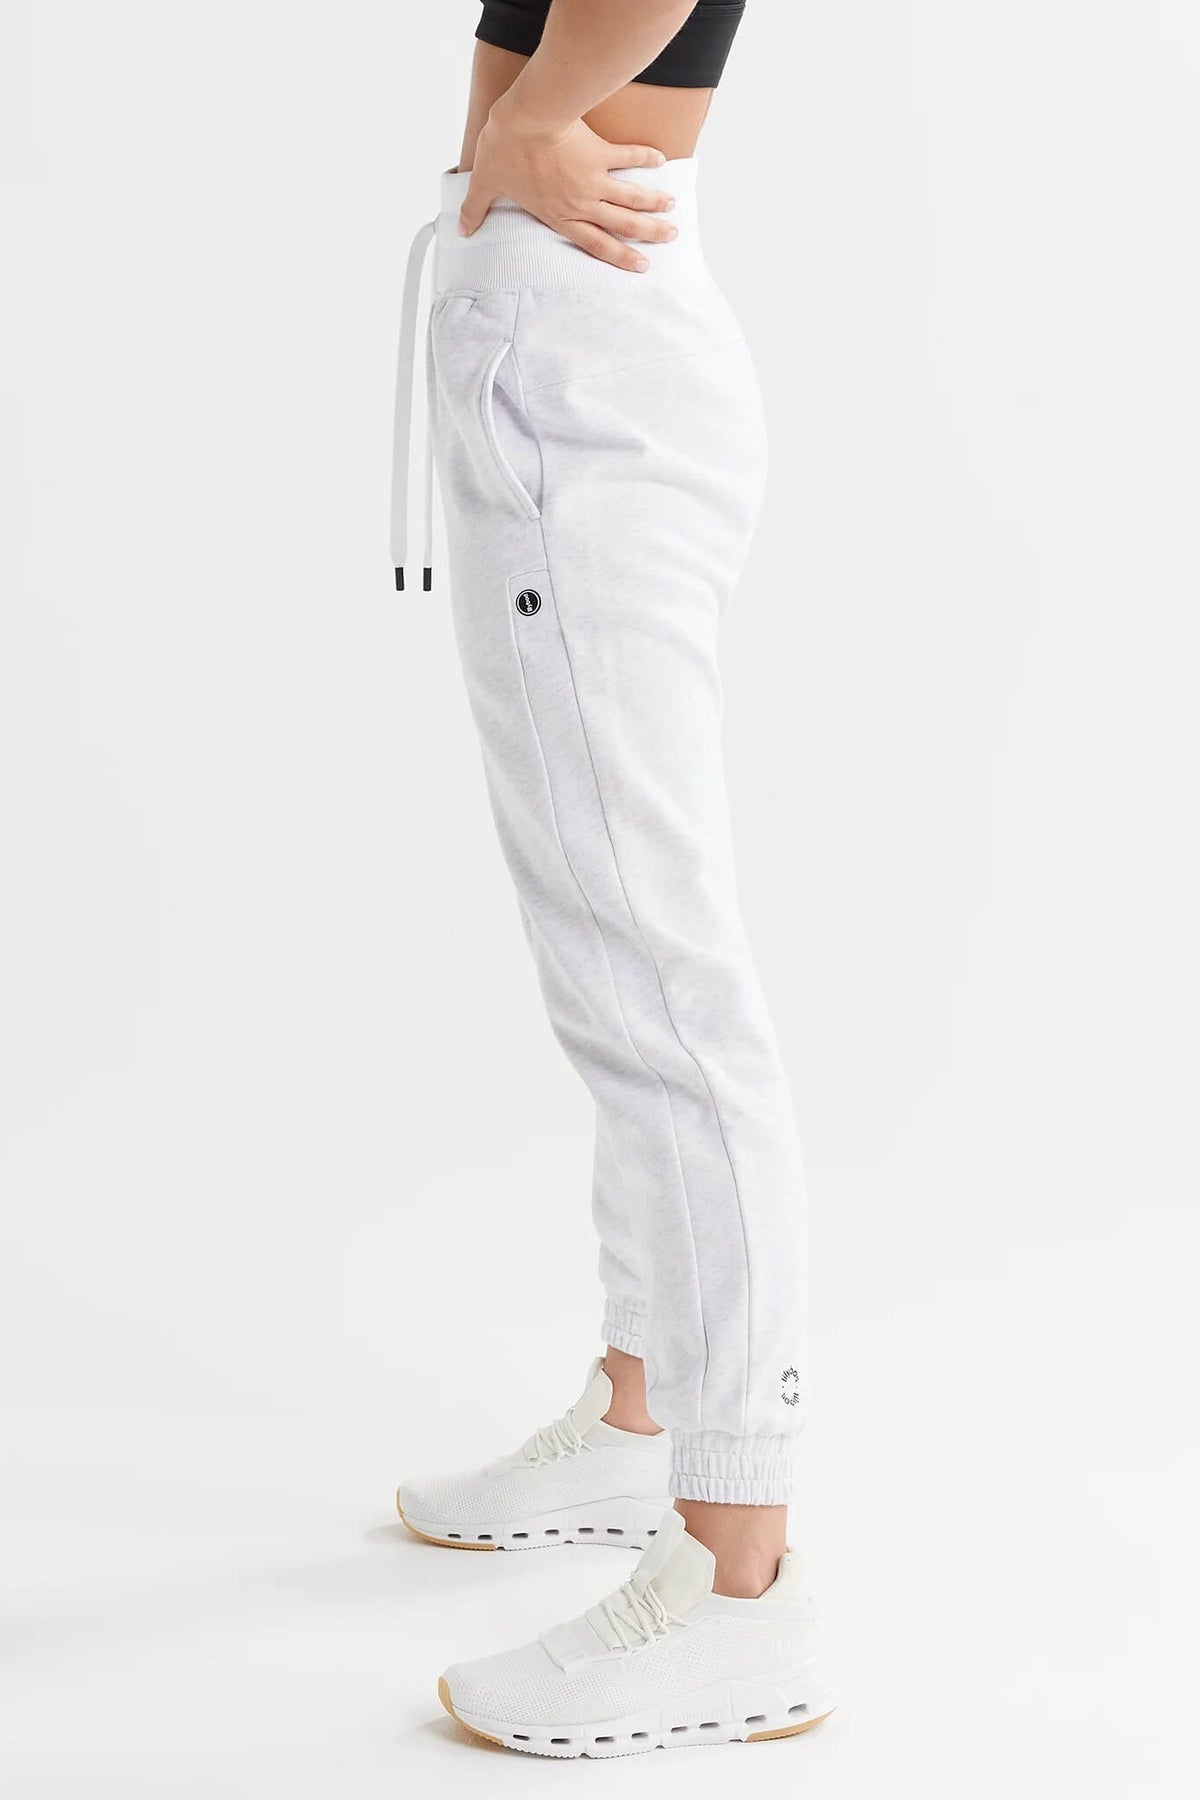 White Oversized Joggers - Erica  Long running pants, Fashion pants,  Sweaters and leggings